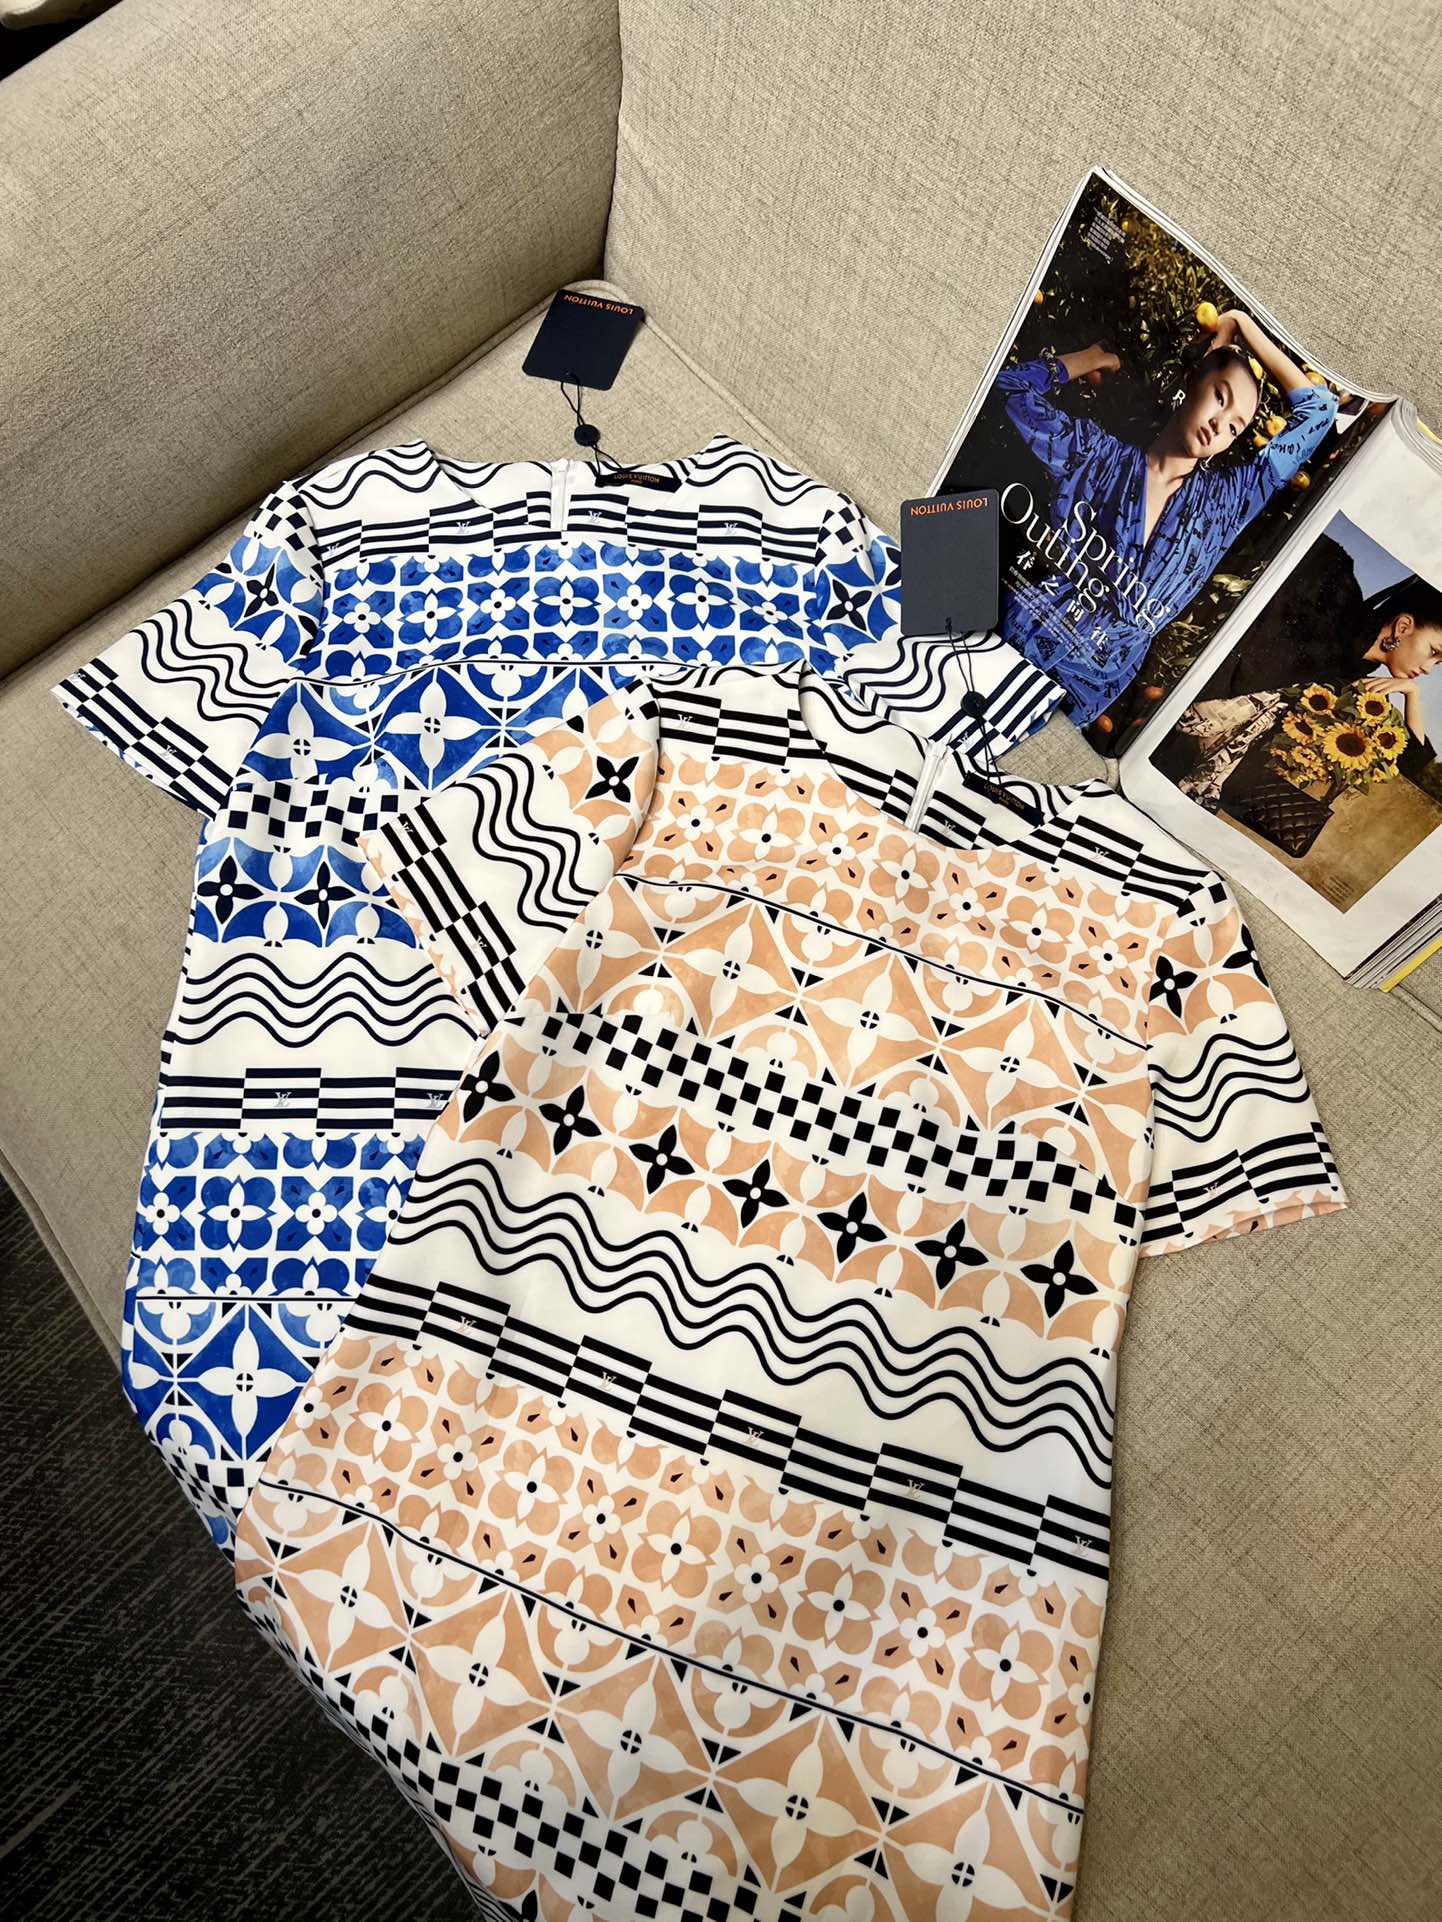 AAAA
 Louis Vuitton Clothing Dresses Printing Summer Collection